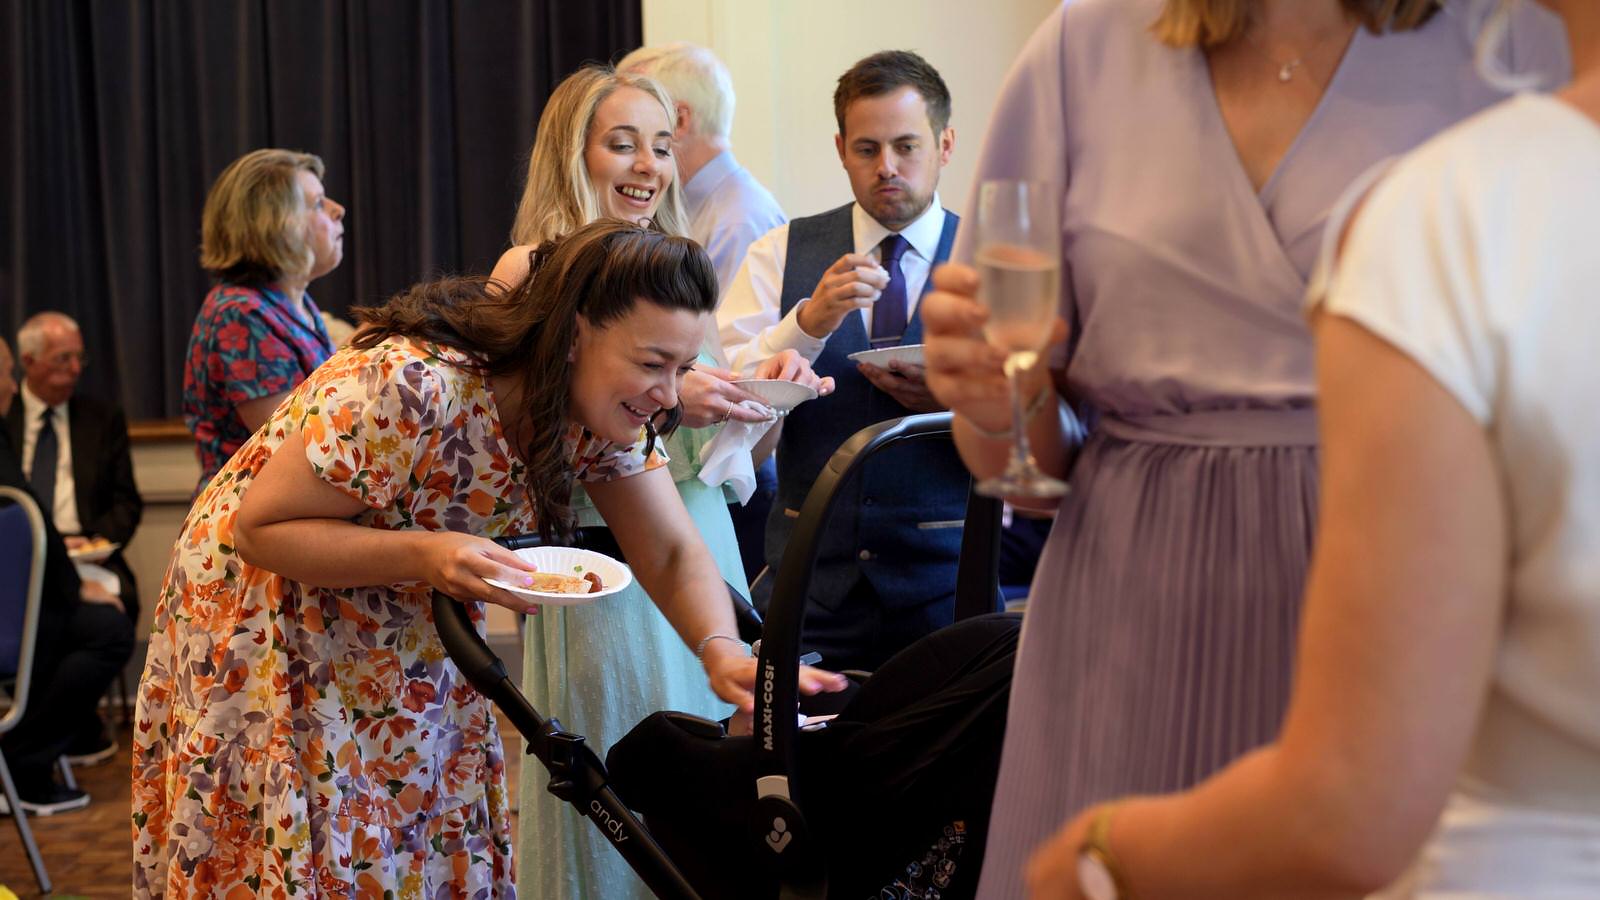 guests smile at baby during wedding reception